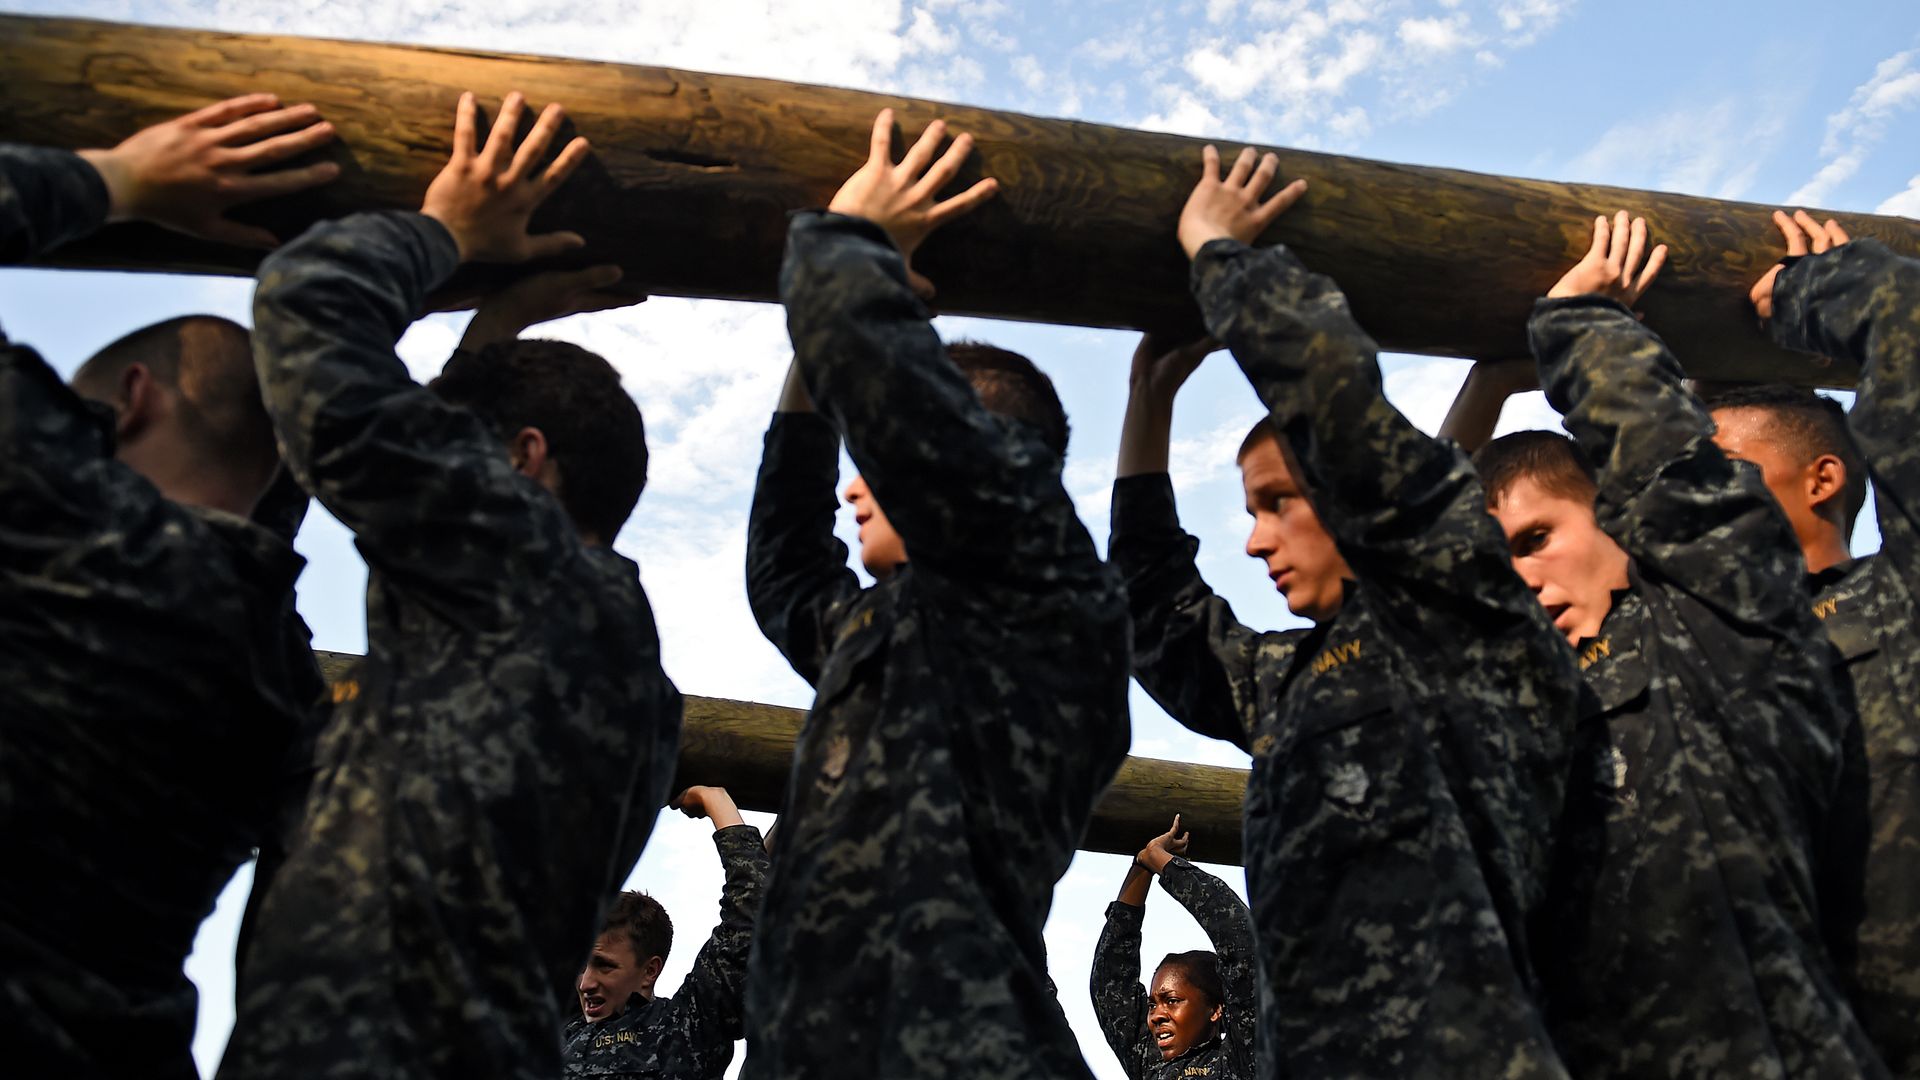 Members of the United States Naval Academy freshman class lift logs during the annual Sea Trials training exercise at the U.S. Naval Academy on May 13, 2014 in Annapolis, Maryland. 